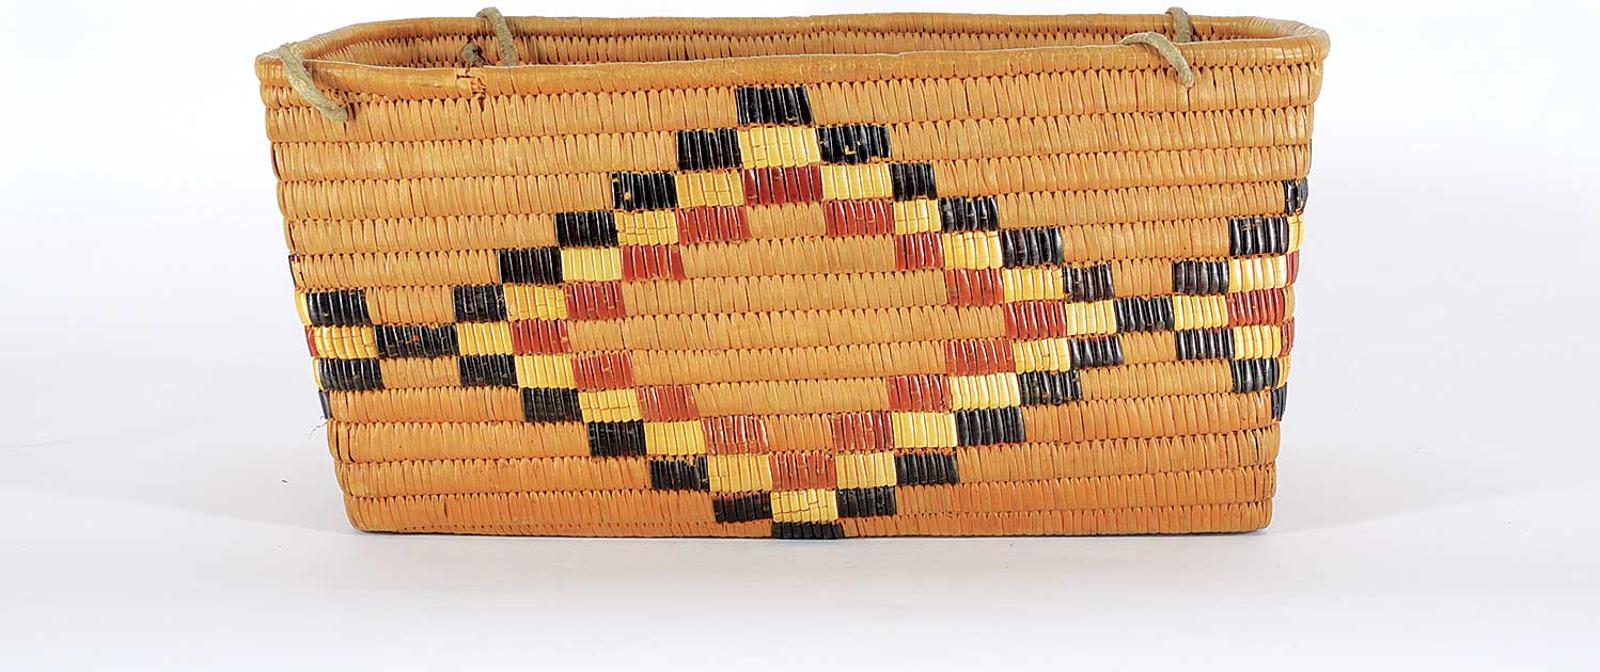 Northwest Coast First Nations School - Rectangular Basket with Diamond Pattern and Suede Handles